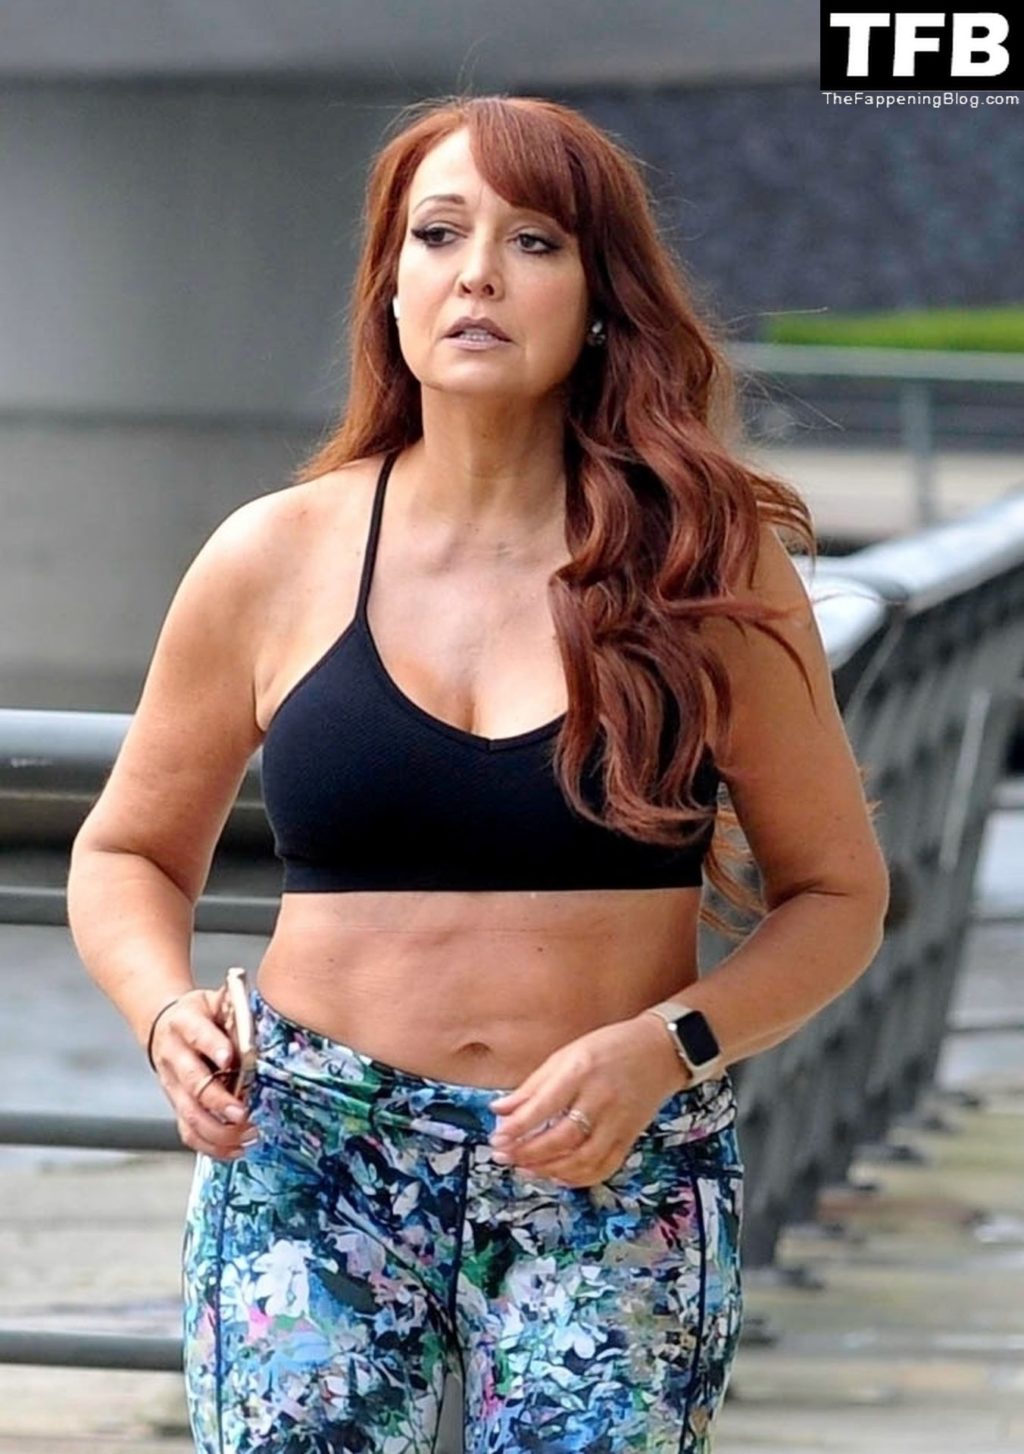 Amy Anzel Sexy The Fappening Blog 13 1024x1454 - Amy Anzel Puts on a Busty Display Working Out at Media City in Manchester (13 Photos)